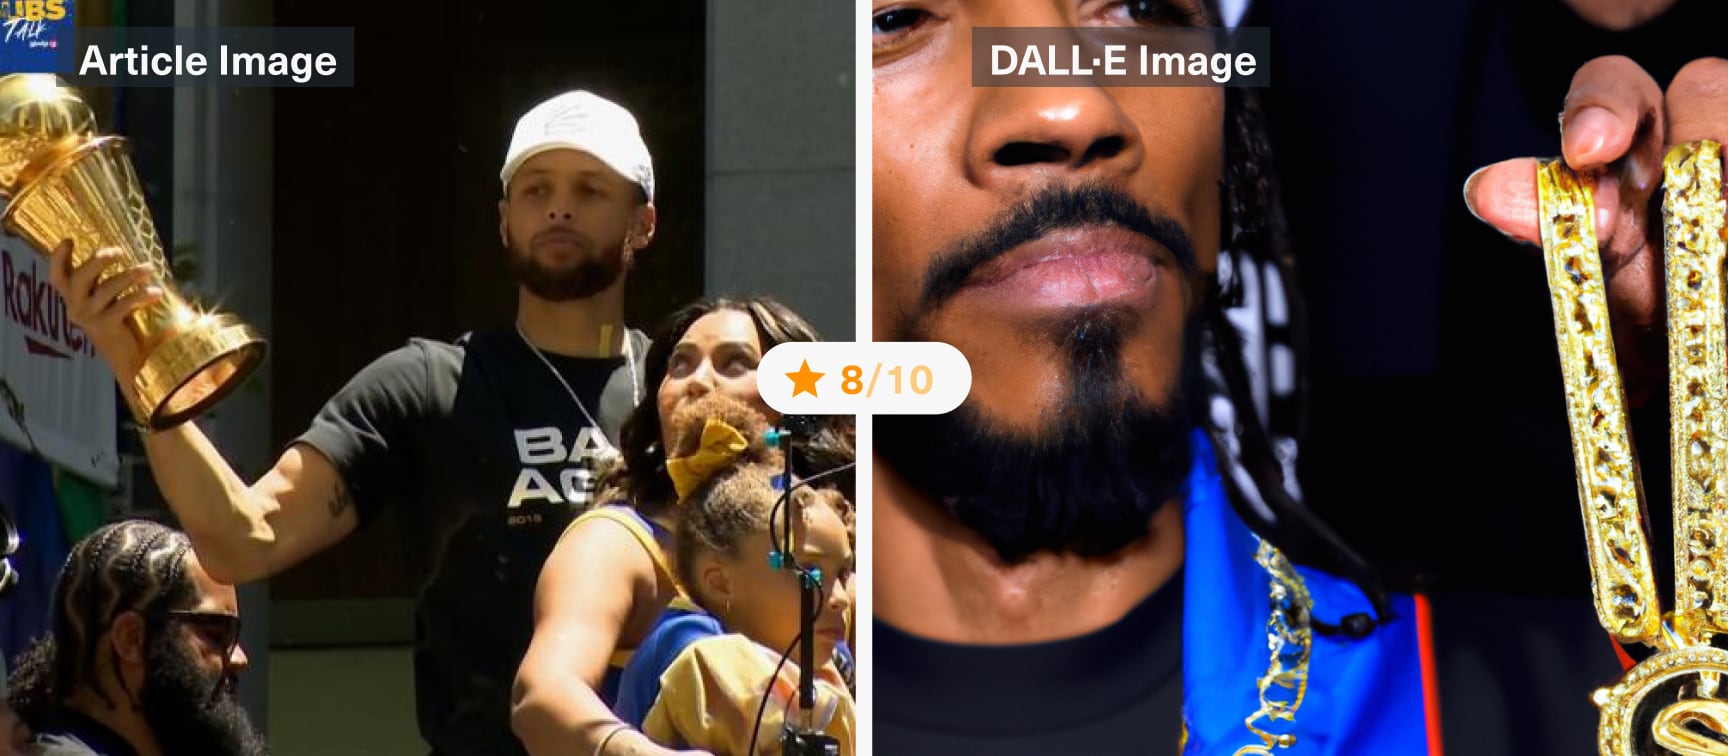 DALL-E meets News API: “Snoop Dogg gifts Warriors' Steph Curry iconic Death Row Records chain”